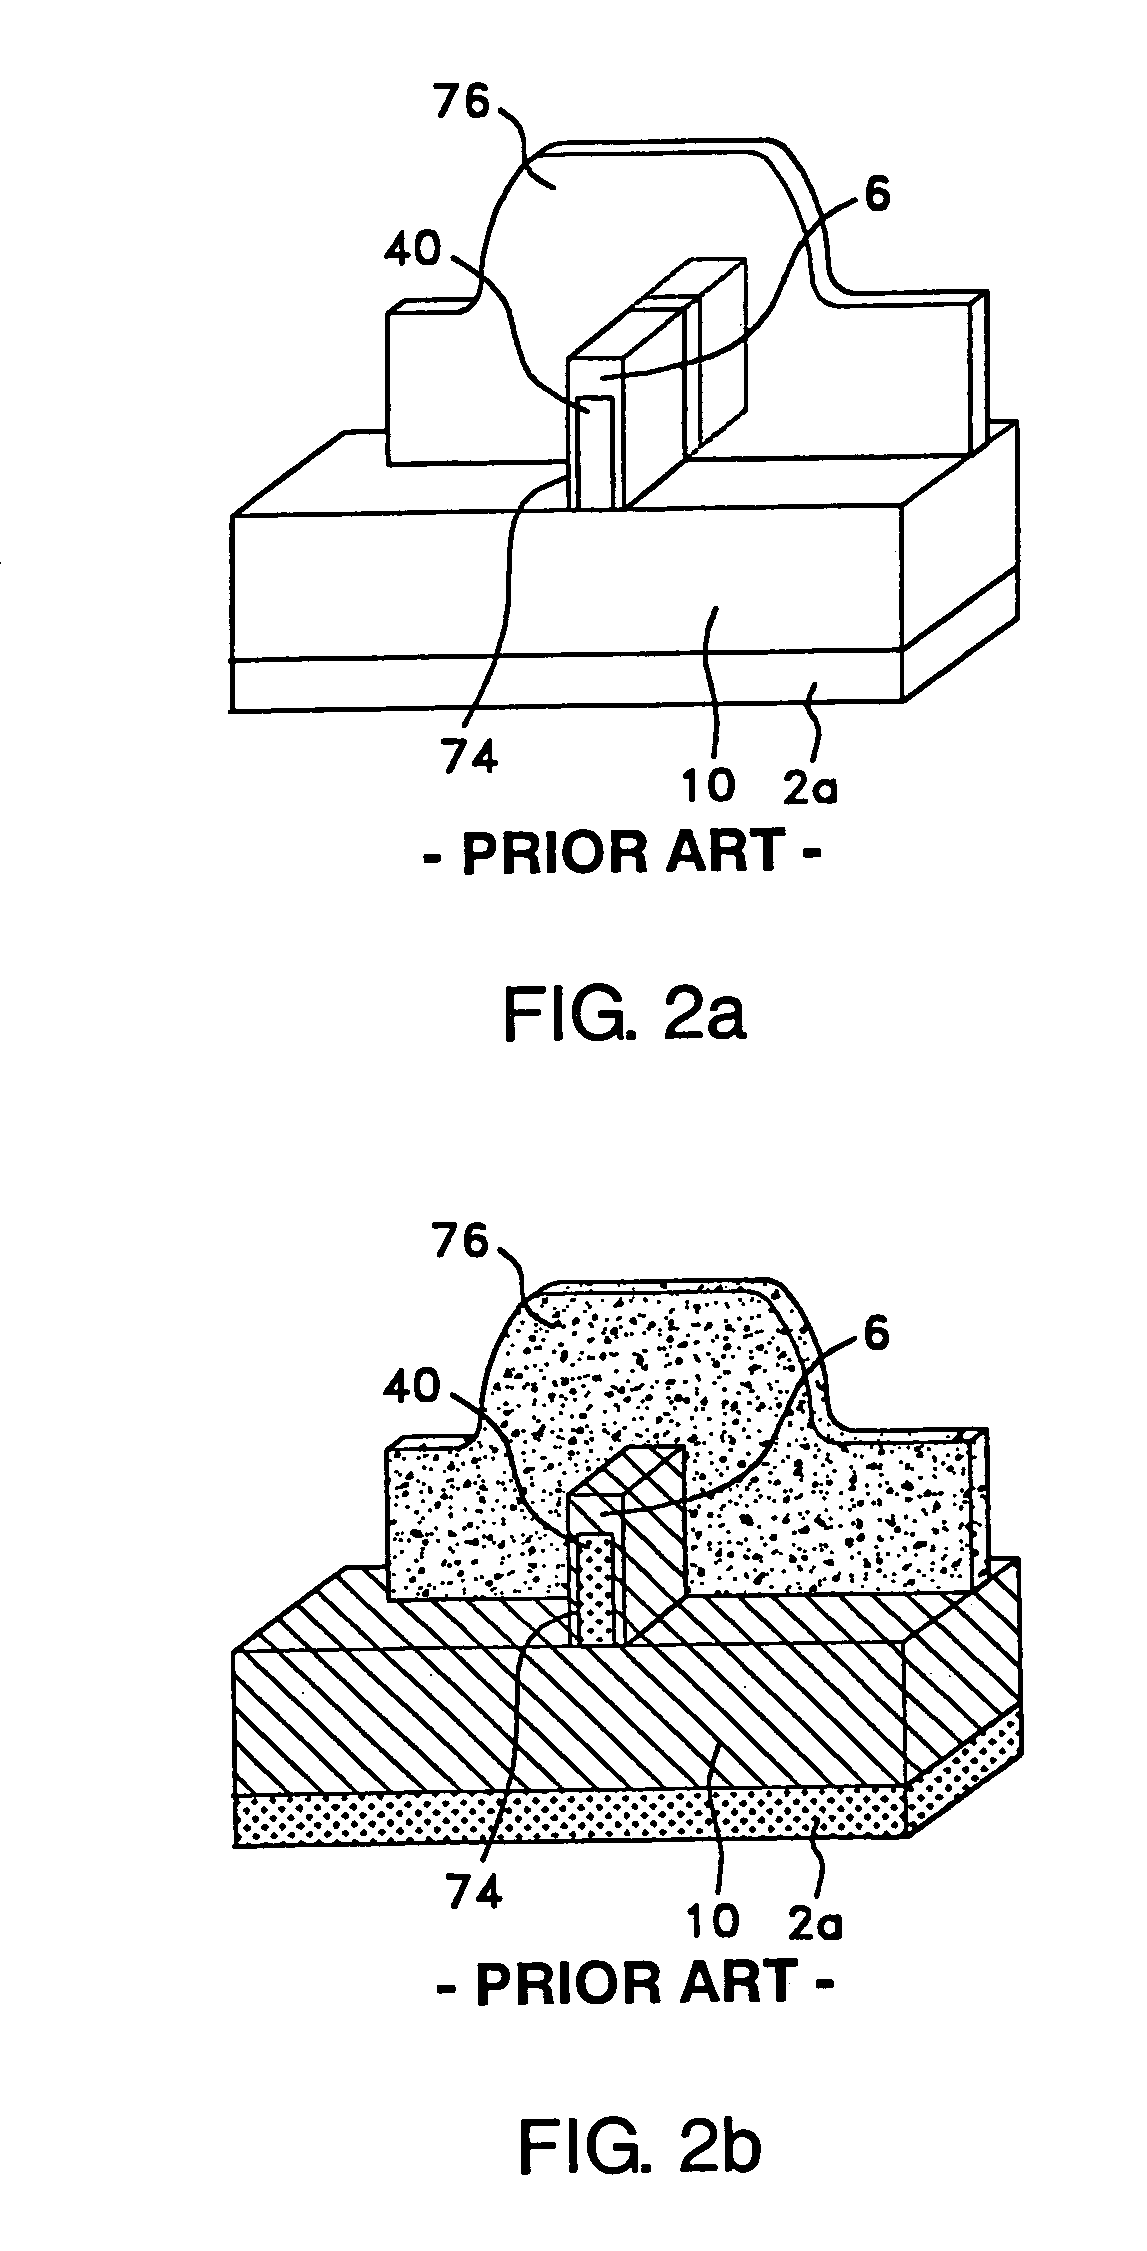 Double-gate flash memory device